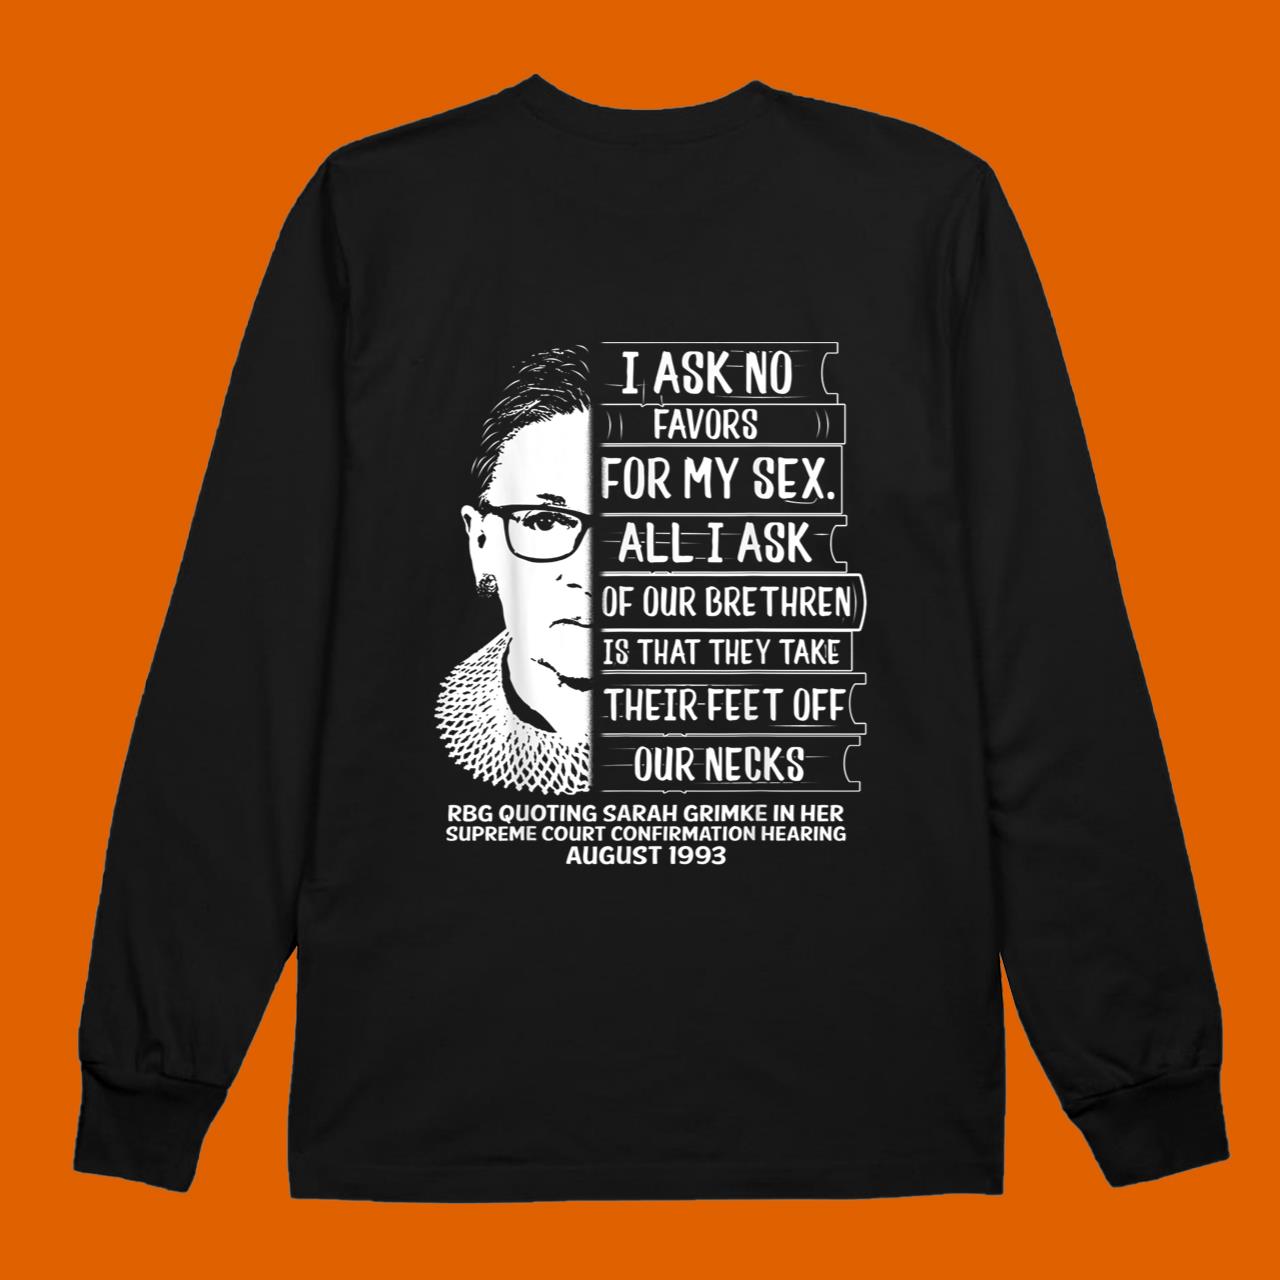 RBG Quote I Ask No Favor For My Sex Feminist Women Rights T-Shirt